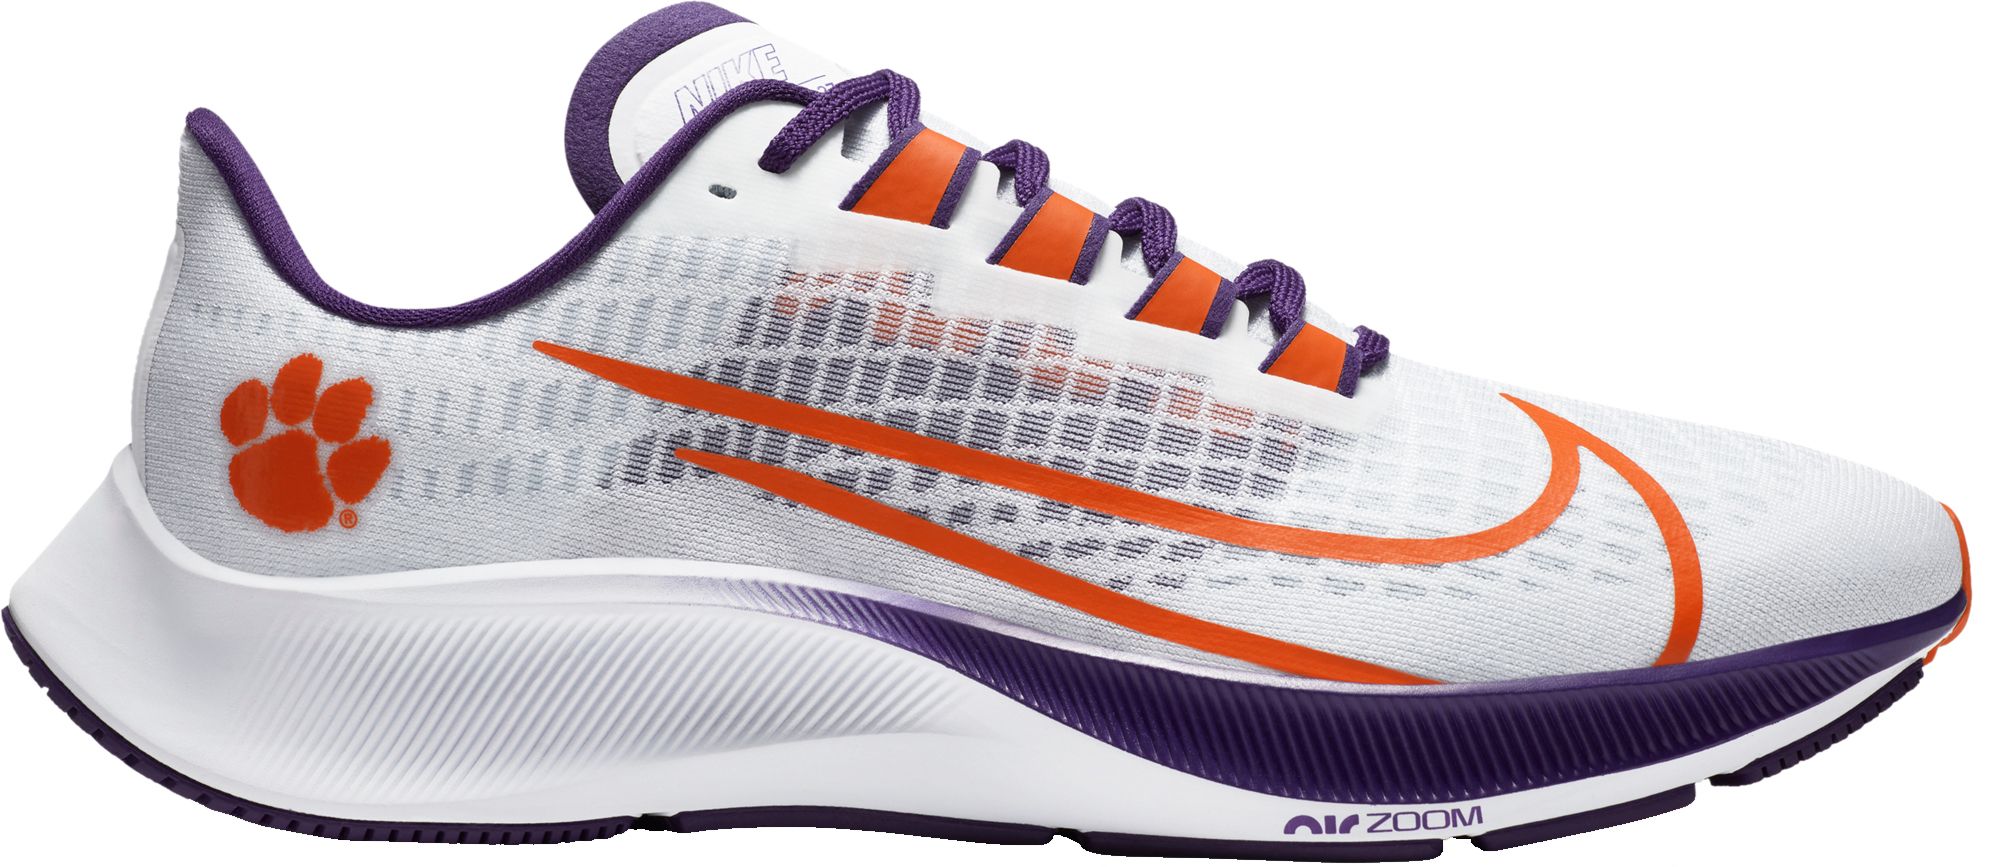 clemson tigers nike shoes